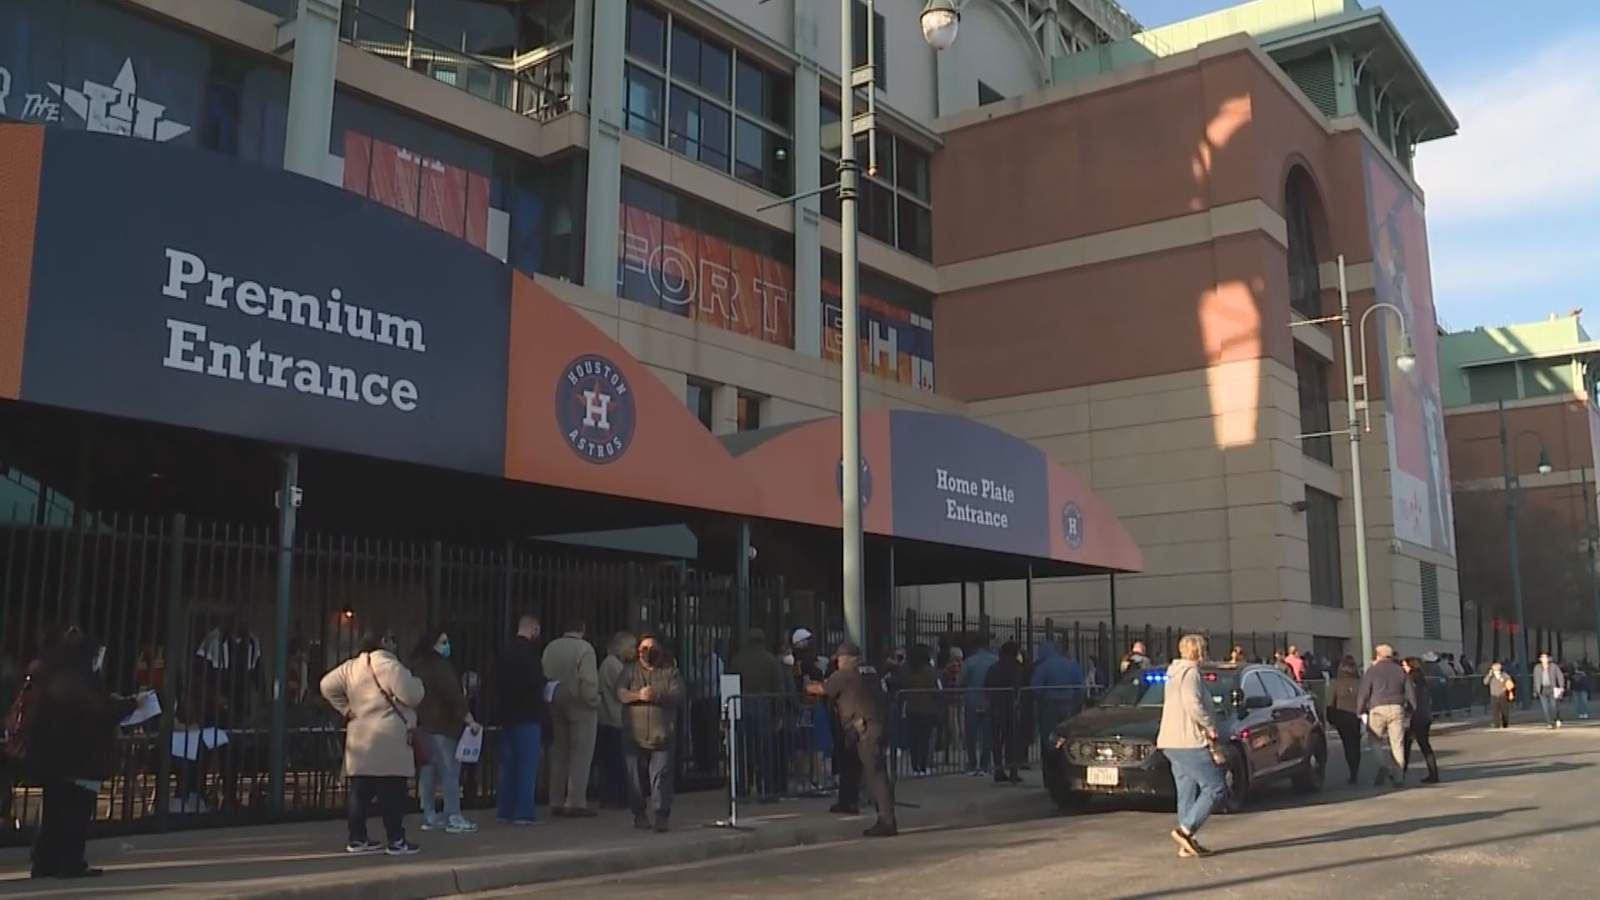 Houston Health administered nearly 3,600 doses at Minute Maid Park COVID-19 vaccination clinic